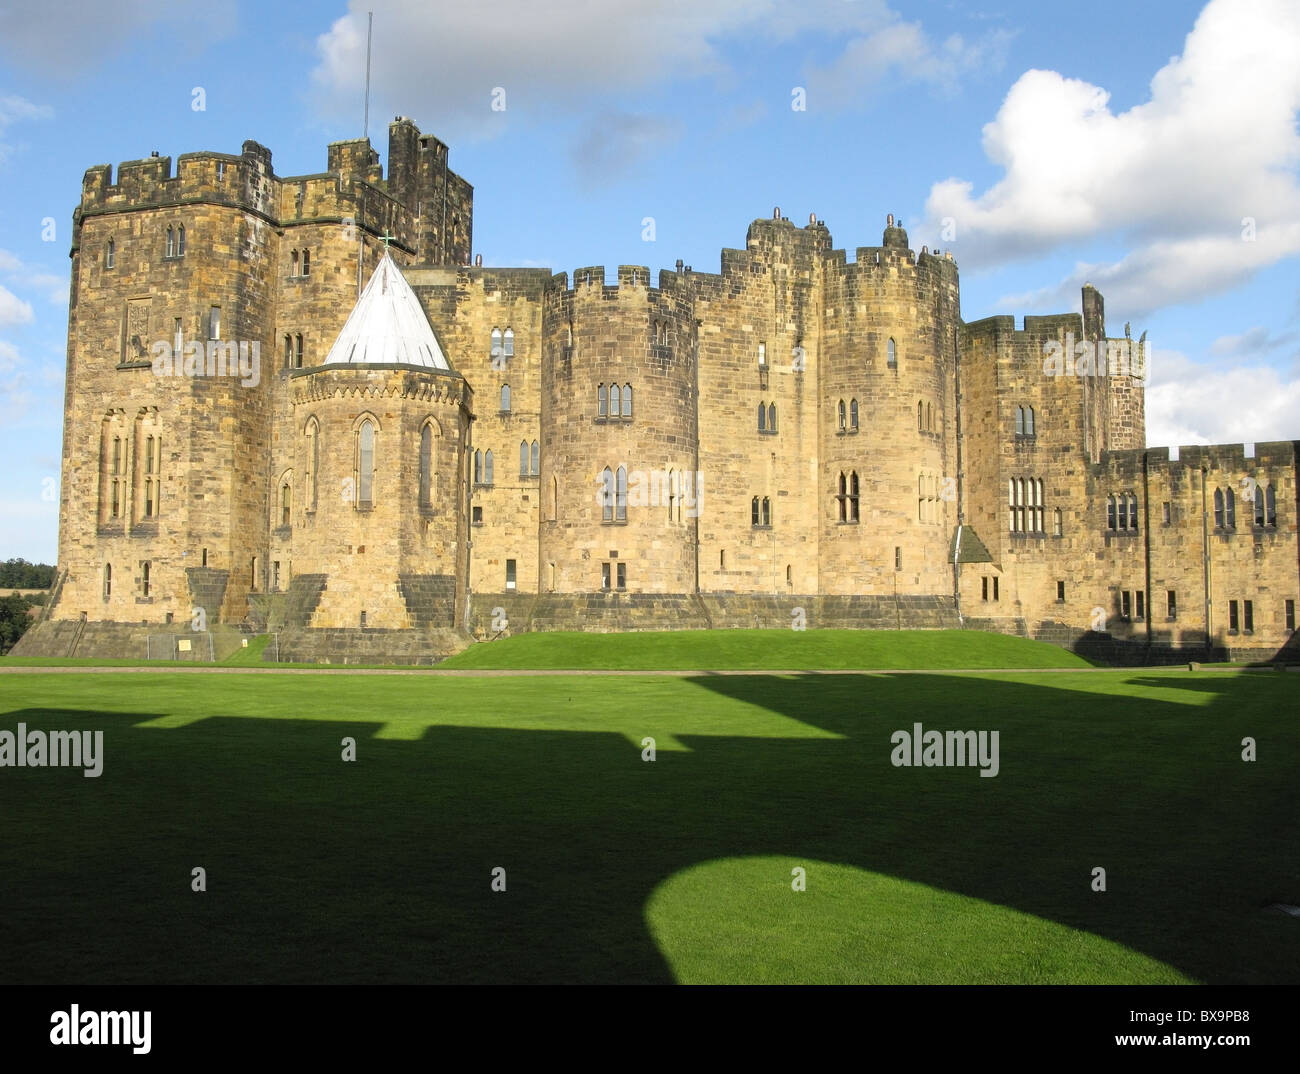 Alnwick Castle keep and chapel seen from inside the curtain wall, Alnwick, Northumberland, England, UK. Stock Photo